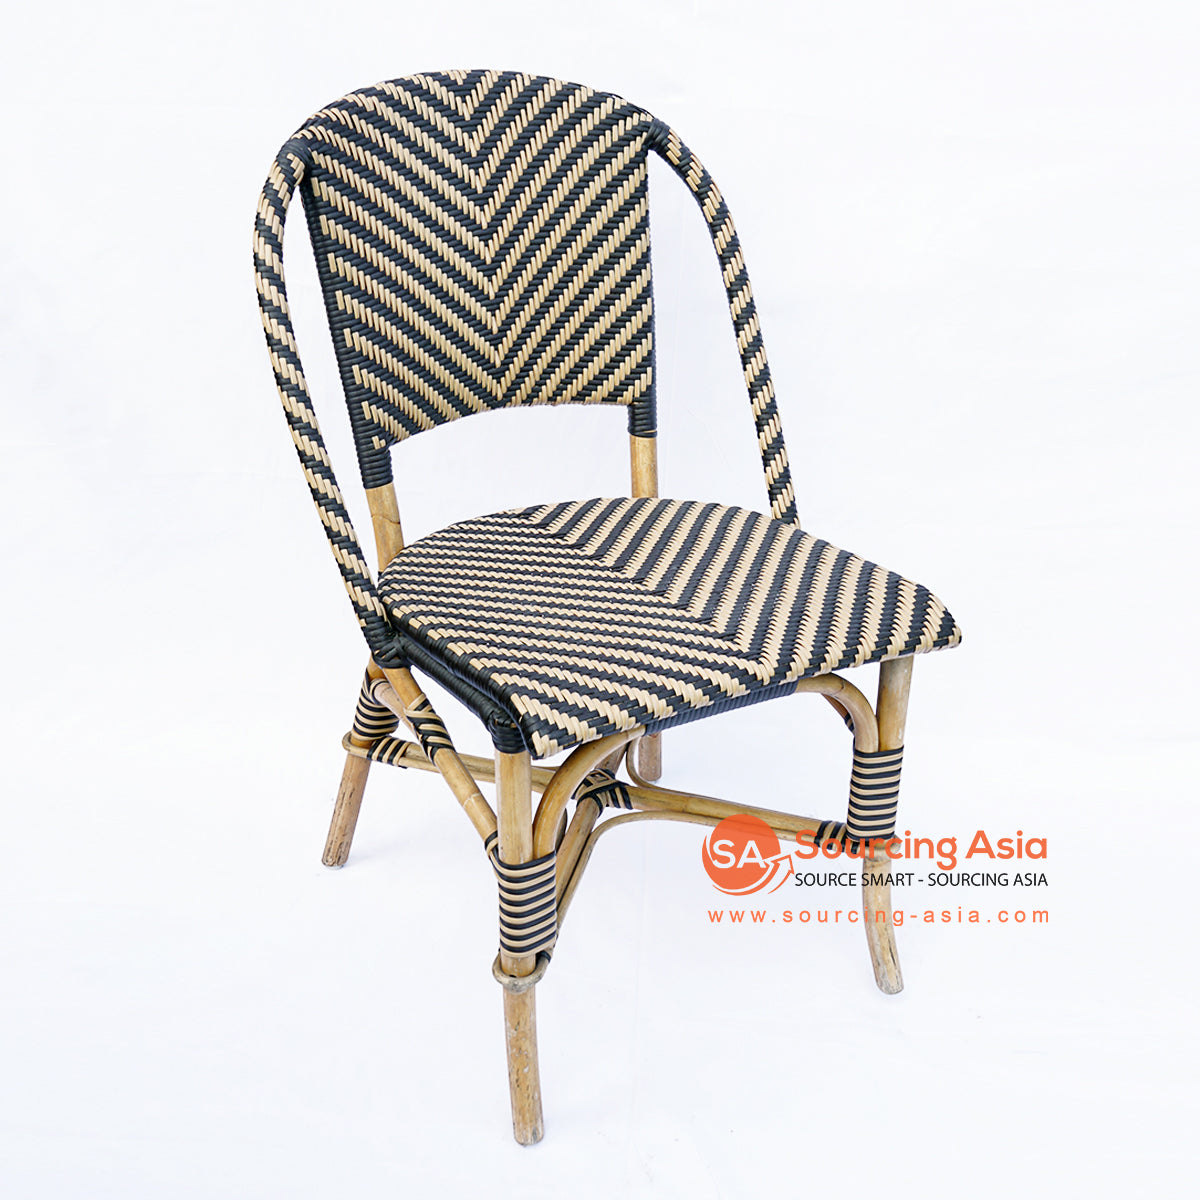 BNTC001-9 BLACK AND WHITE SYNTHETIC RATTAN PARISIAN STYLE CAFE DINING CHAIR